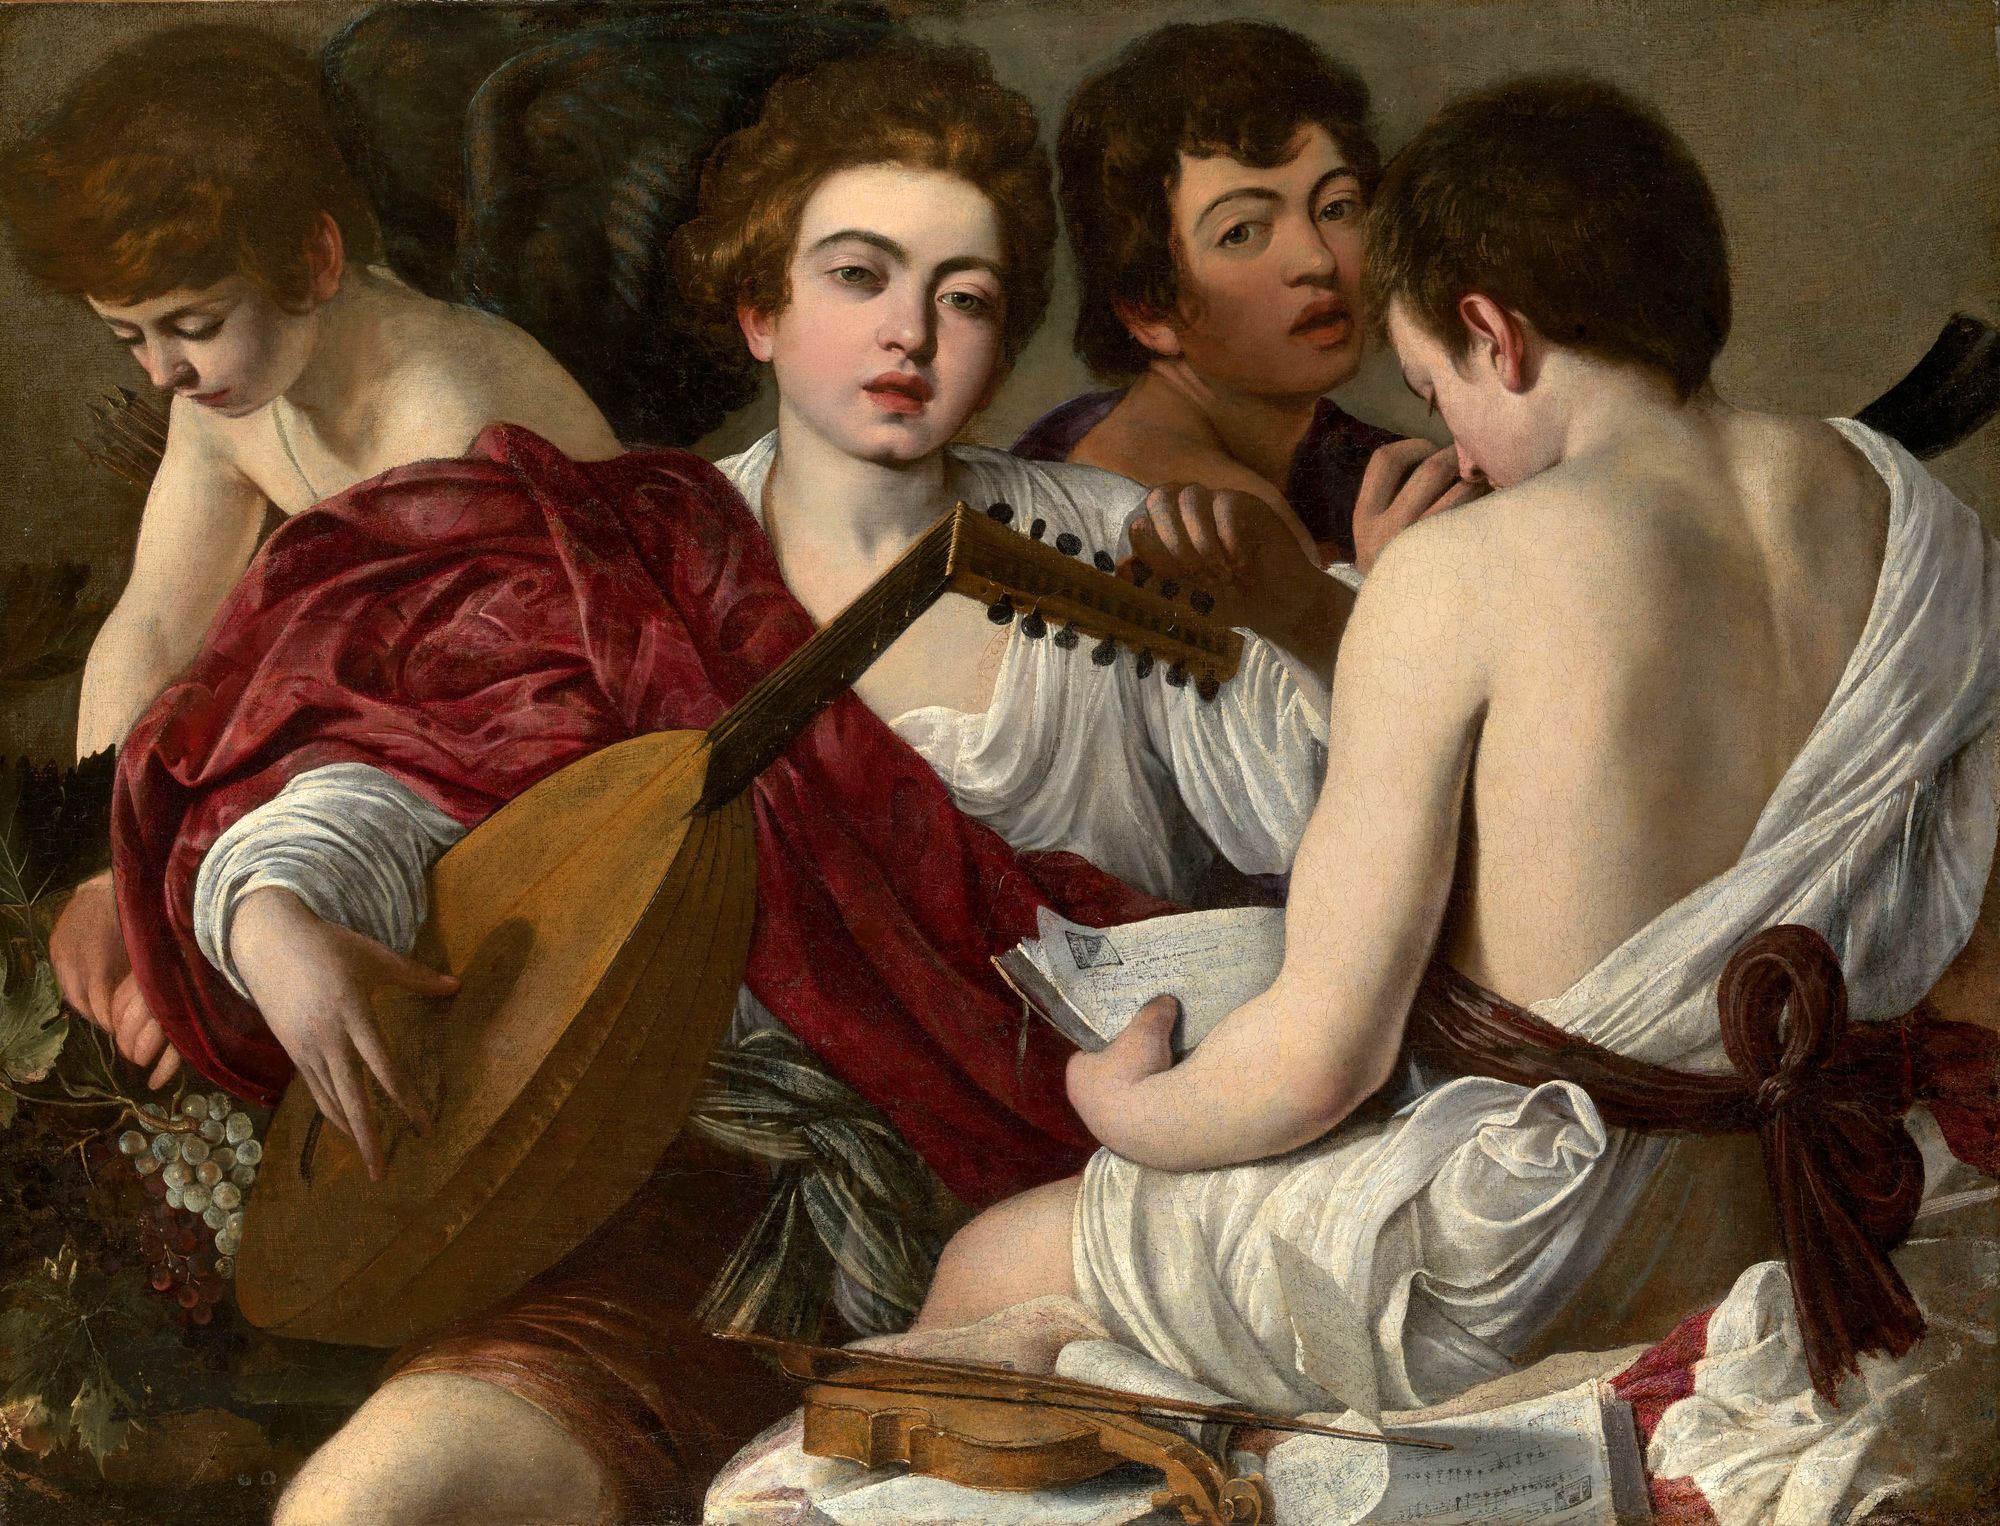 Group of four young men making music